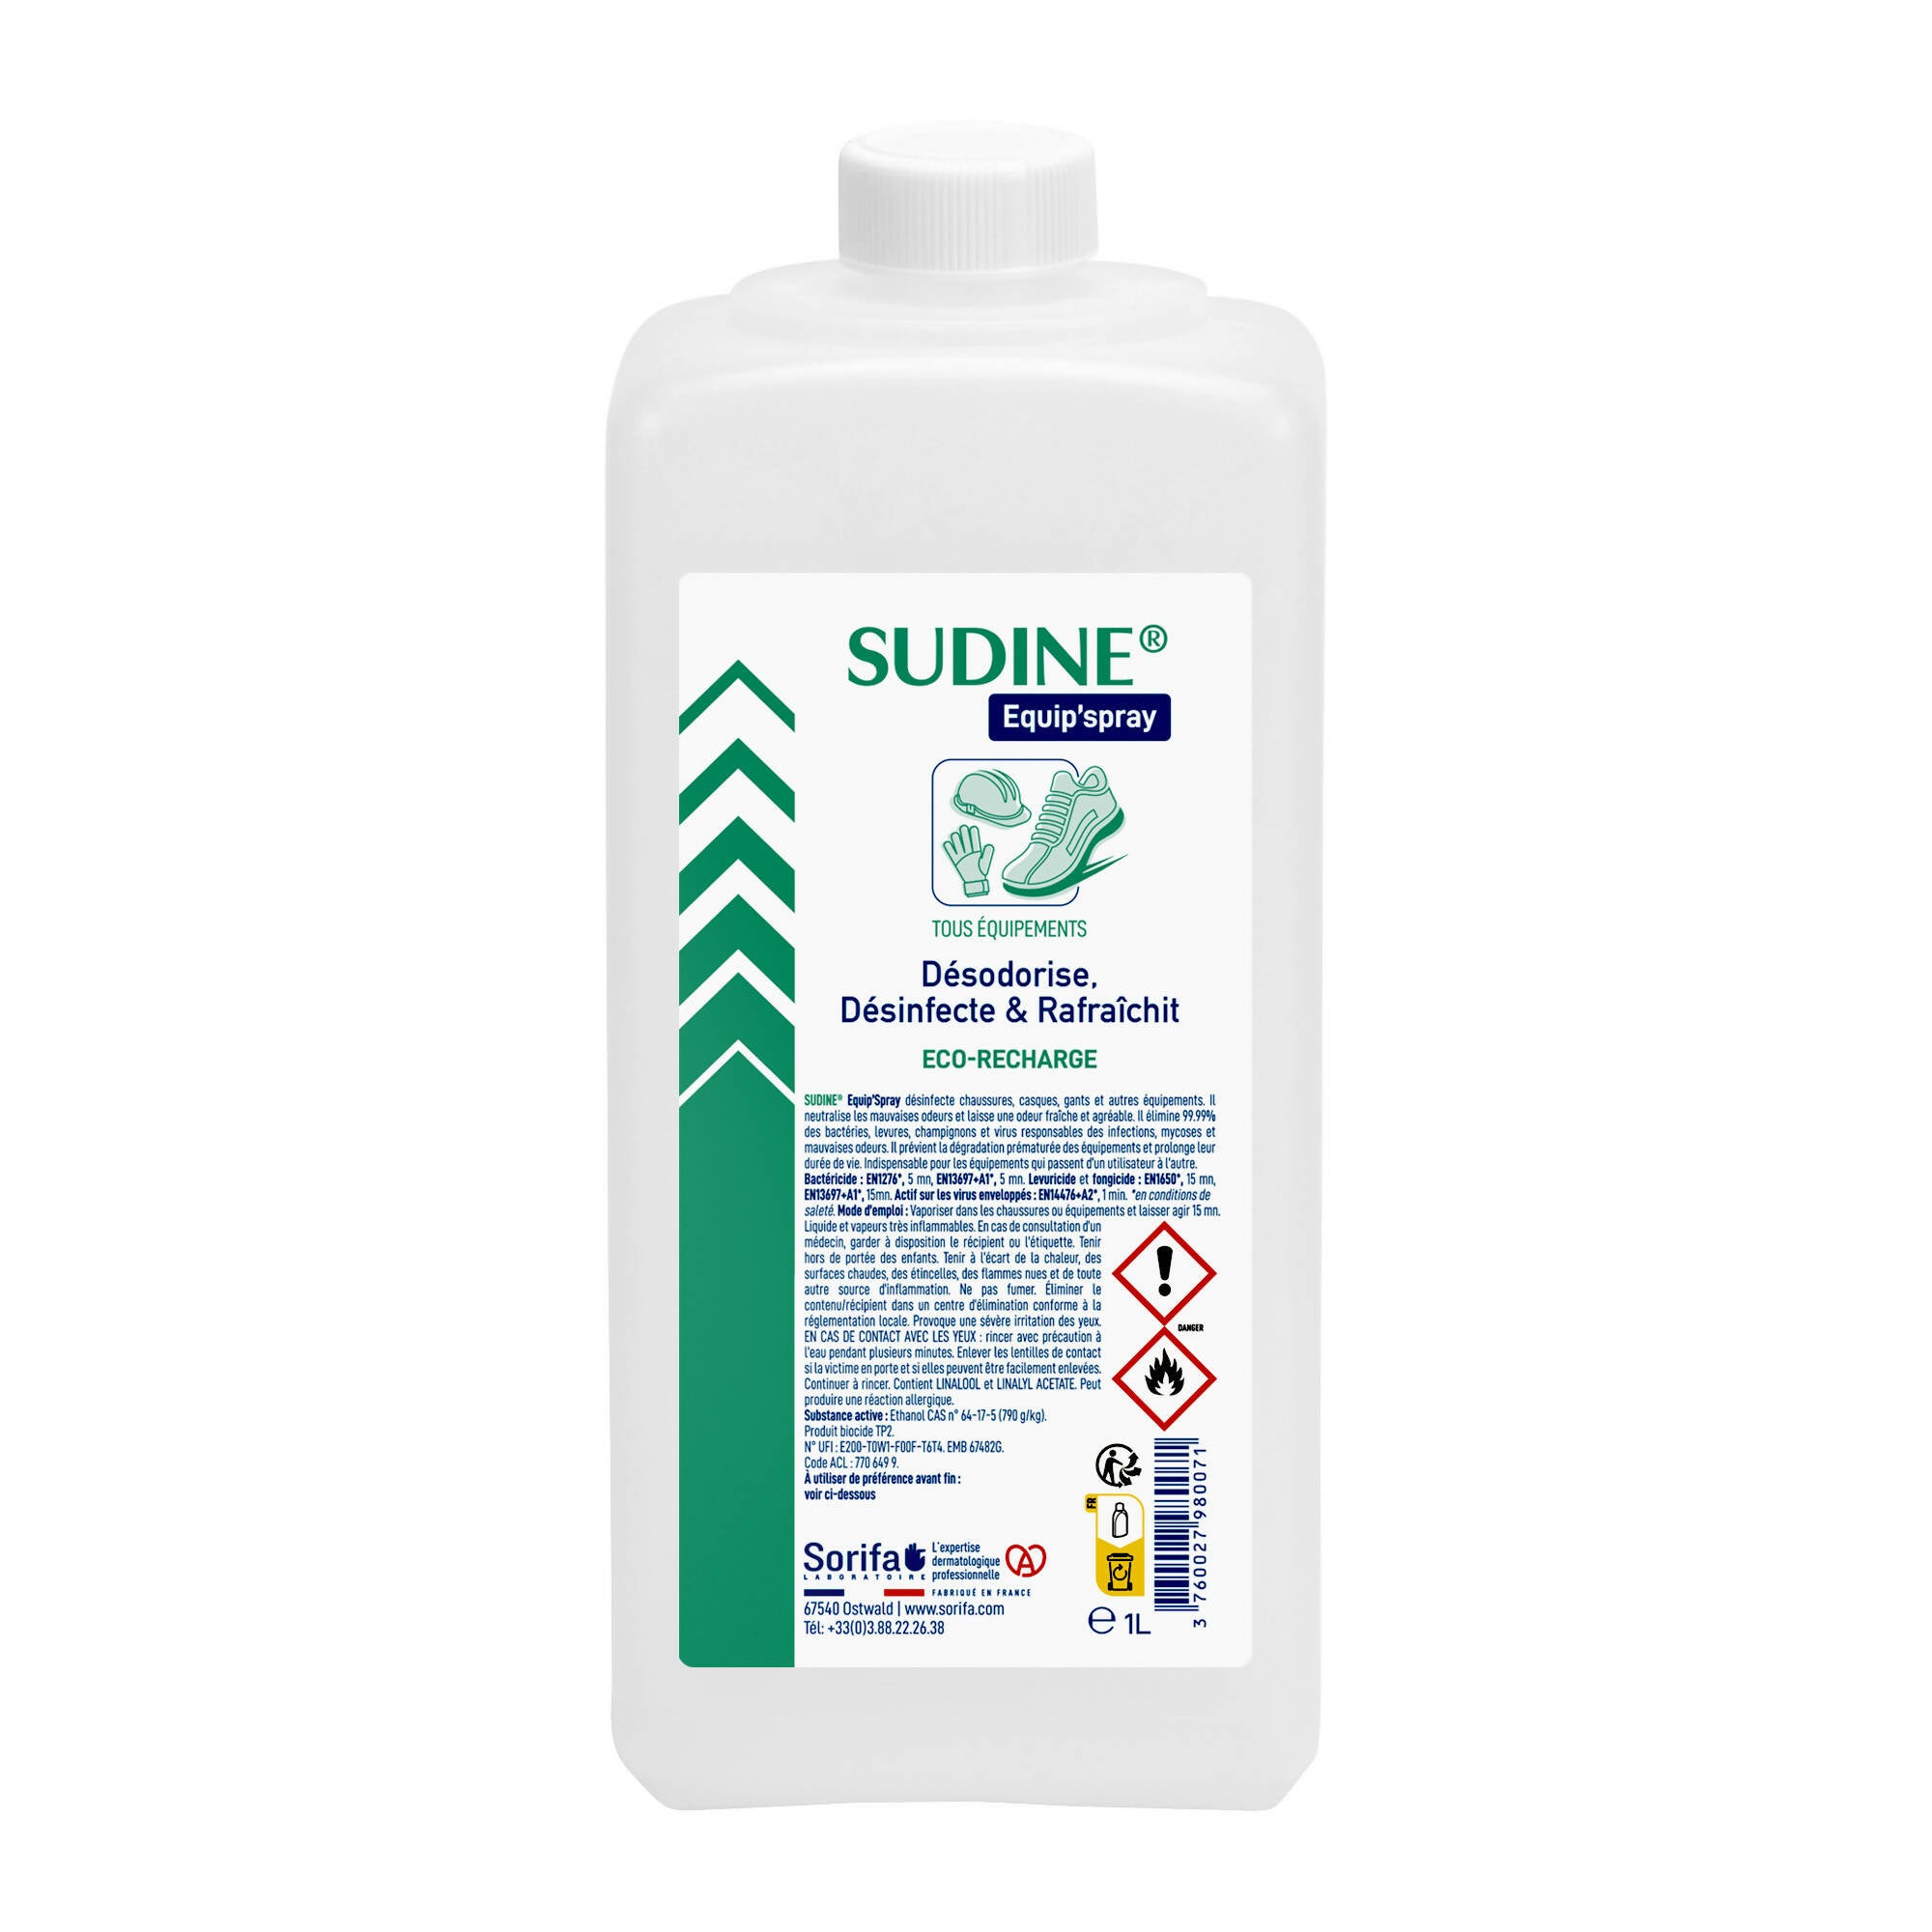 SORIFA - Complete box of 12 - Sudine Equip'spray - Deodorizes, disinfects, refreshes - Shoes, helmets, gloves, equipment - 1L refill for SUDINE Equip'spray 50 and 125 ml or for the 1L SORIFA Spray